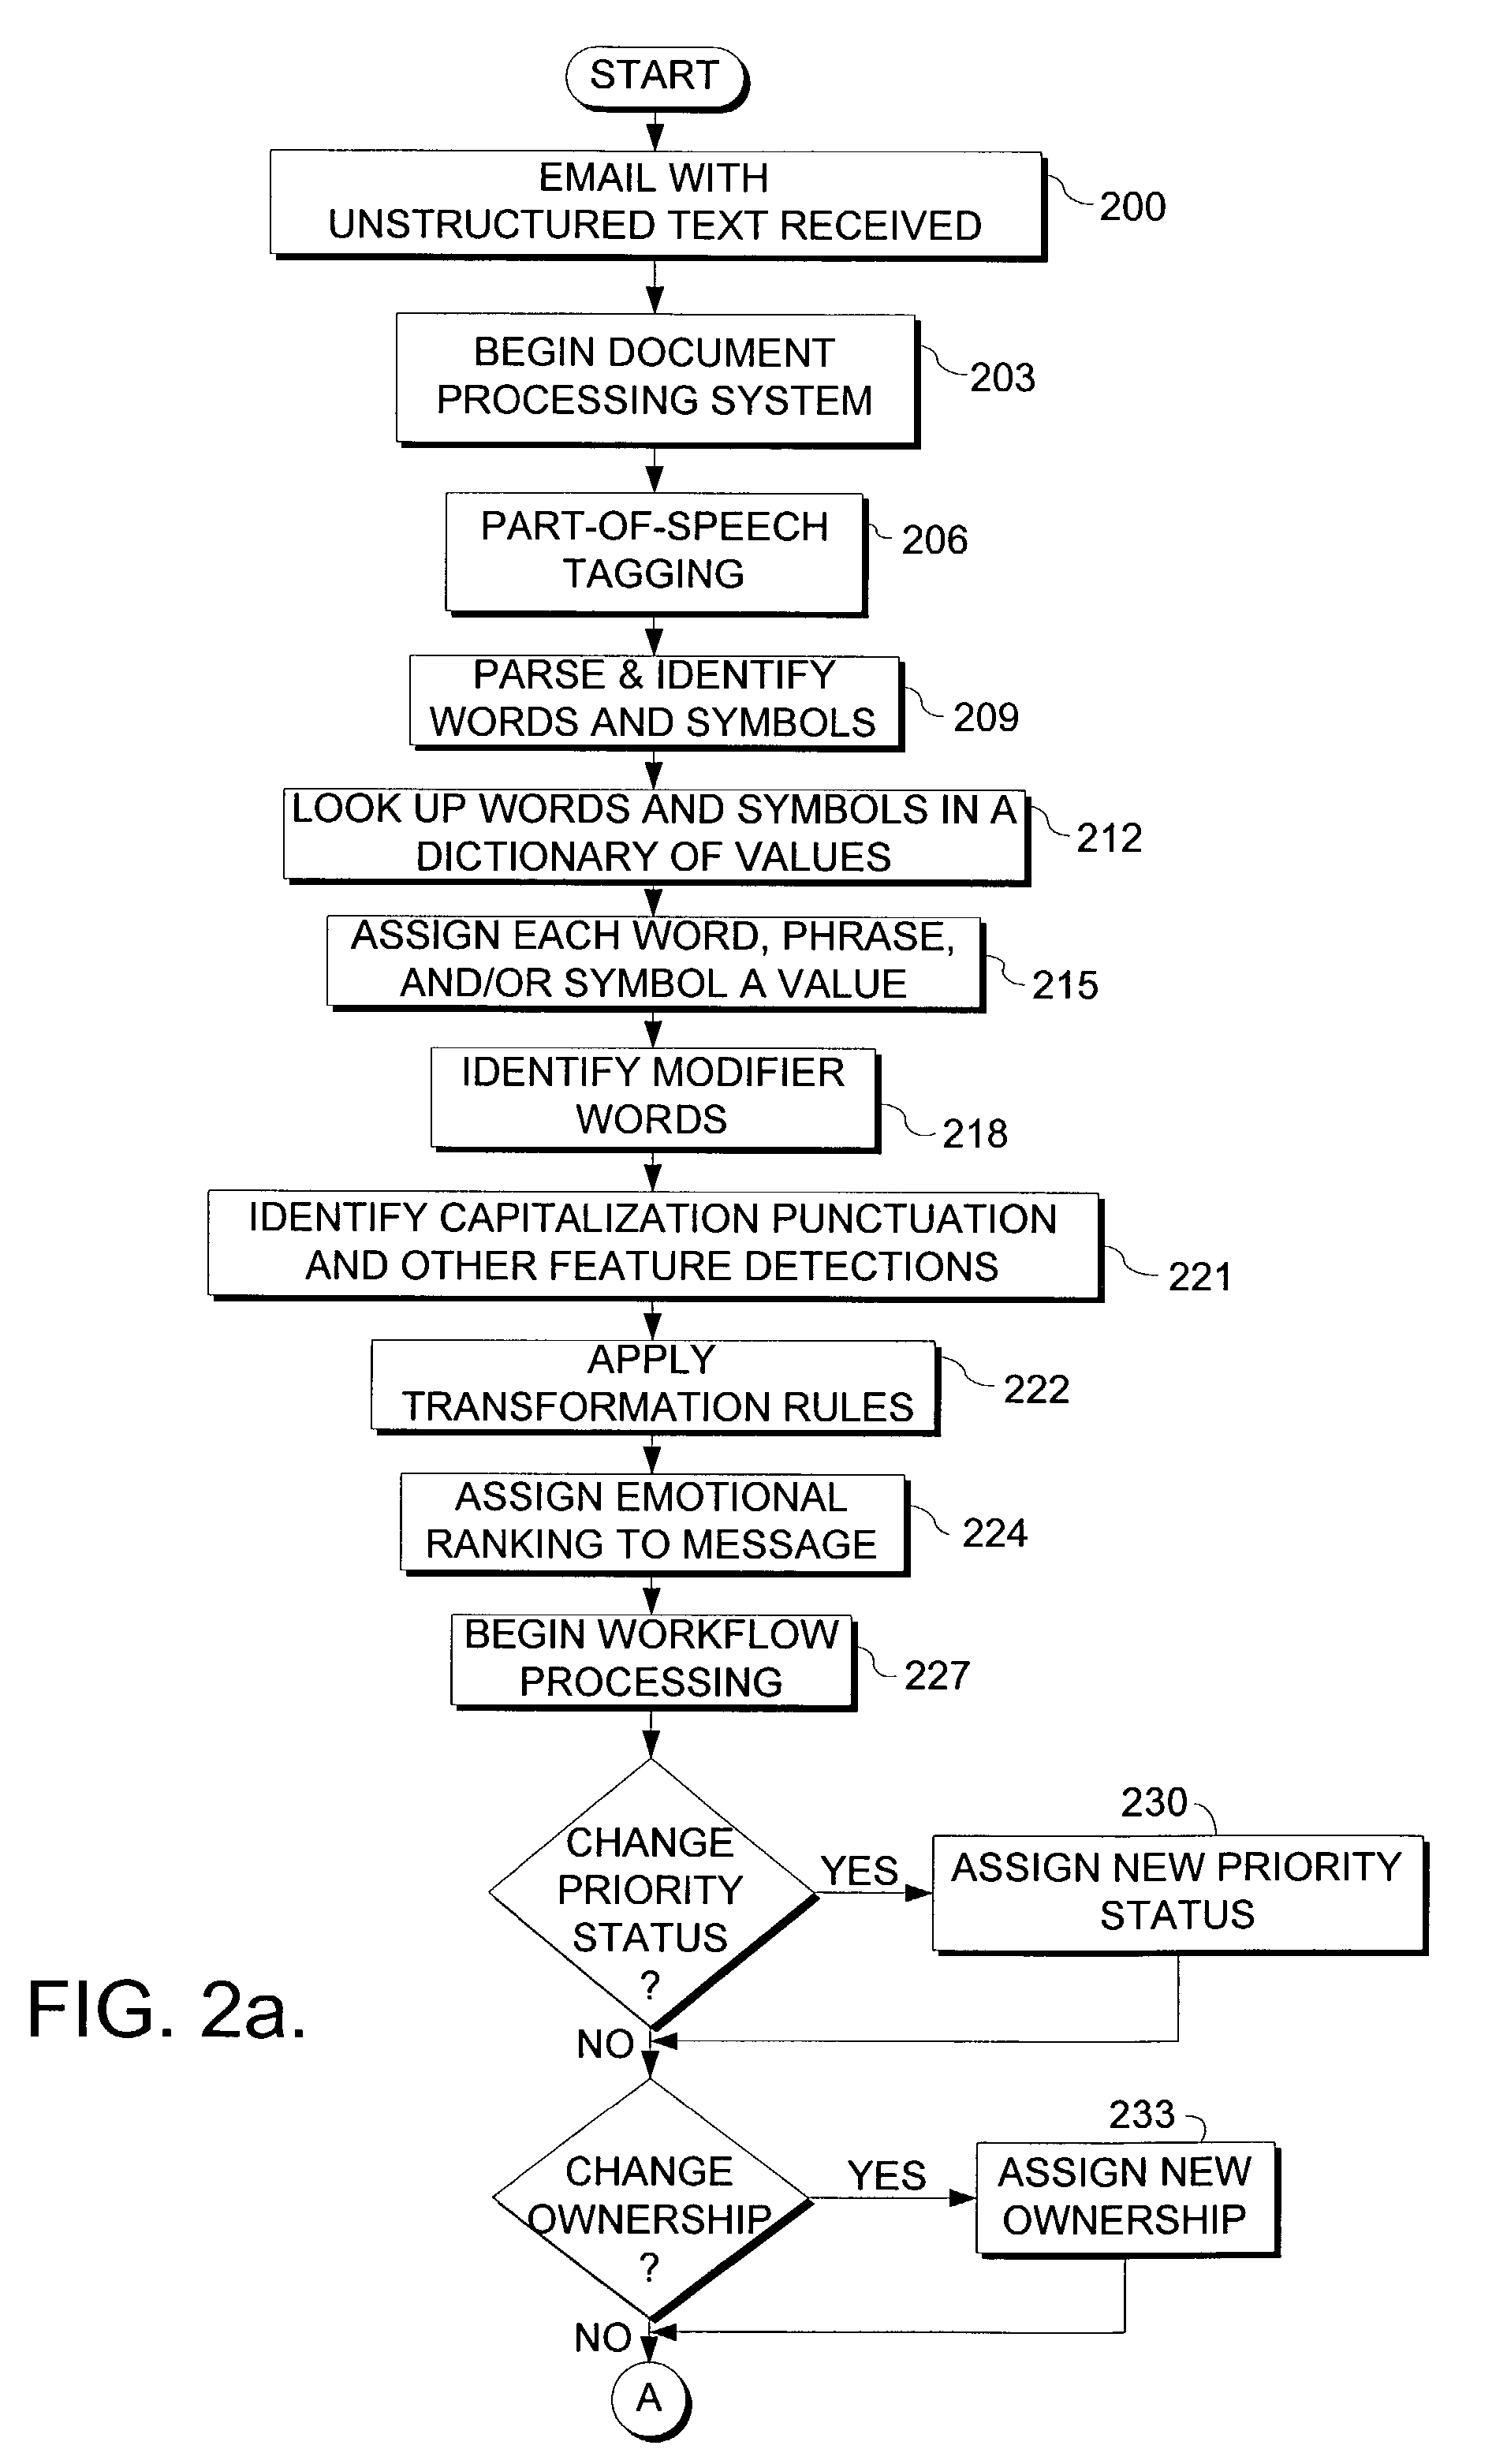 Method for routing electronic correspondence based on the level and type of emotion contained therein